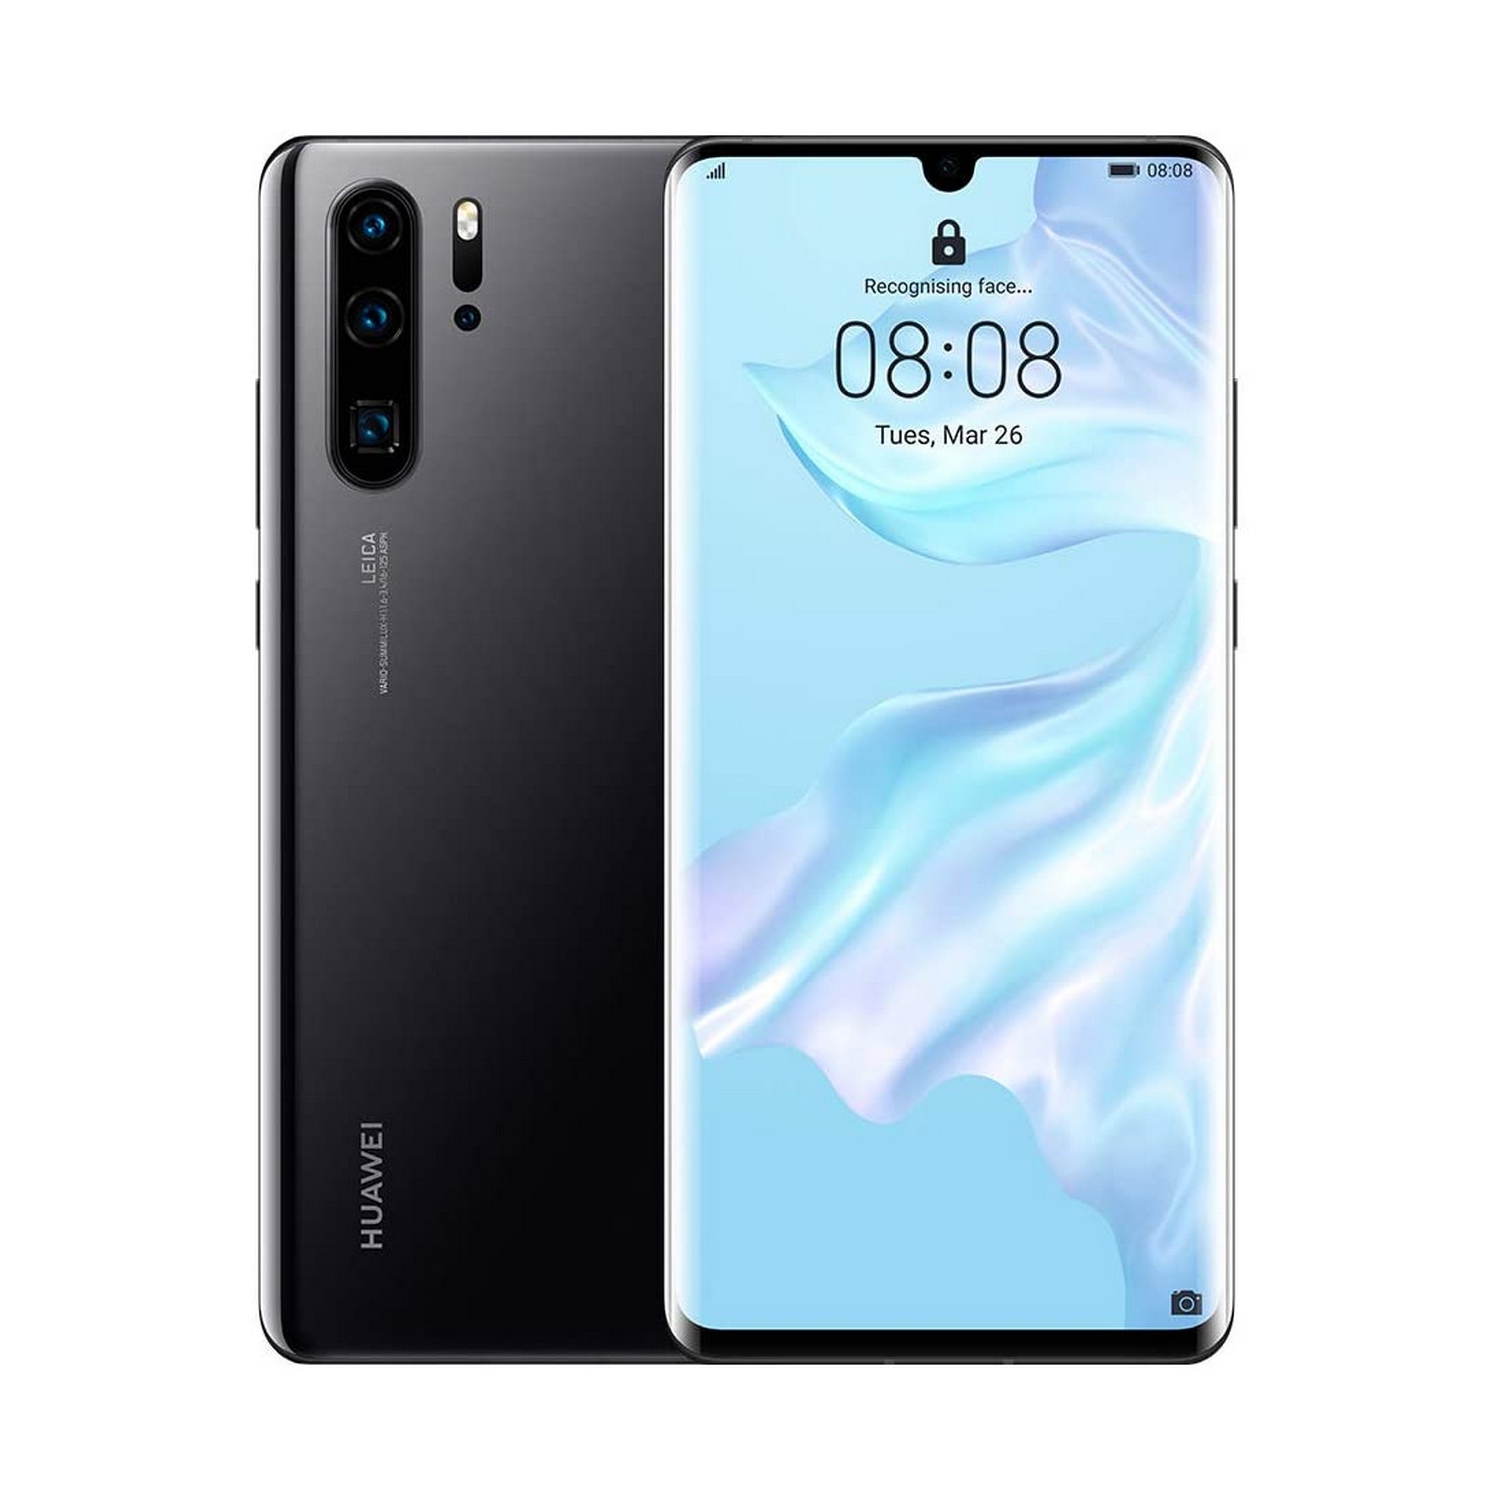 Huawei P30 Pro | Black | 128 GB | Certified Pre-owned